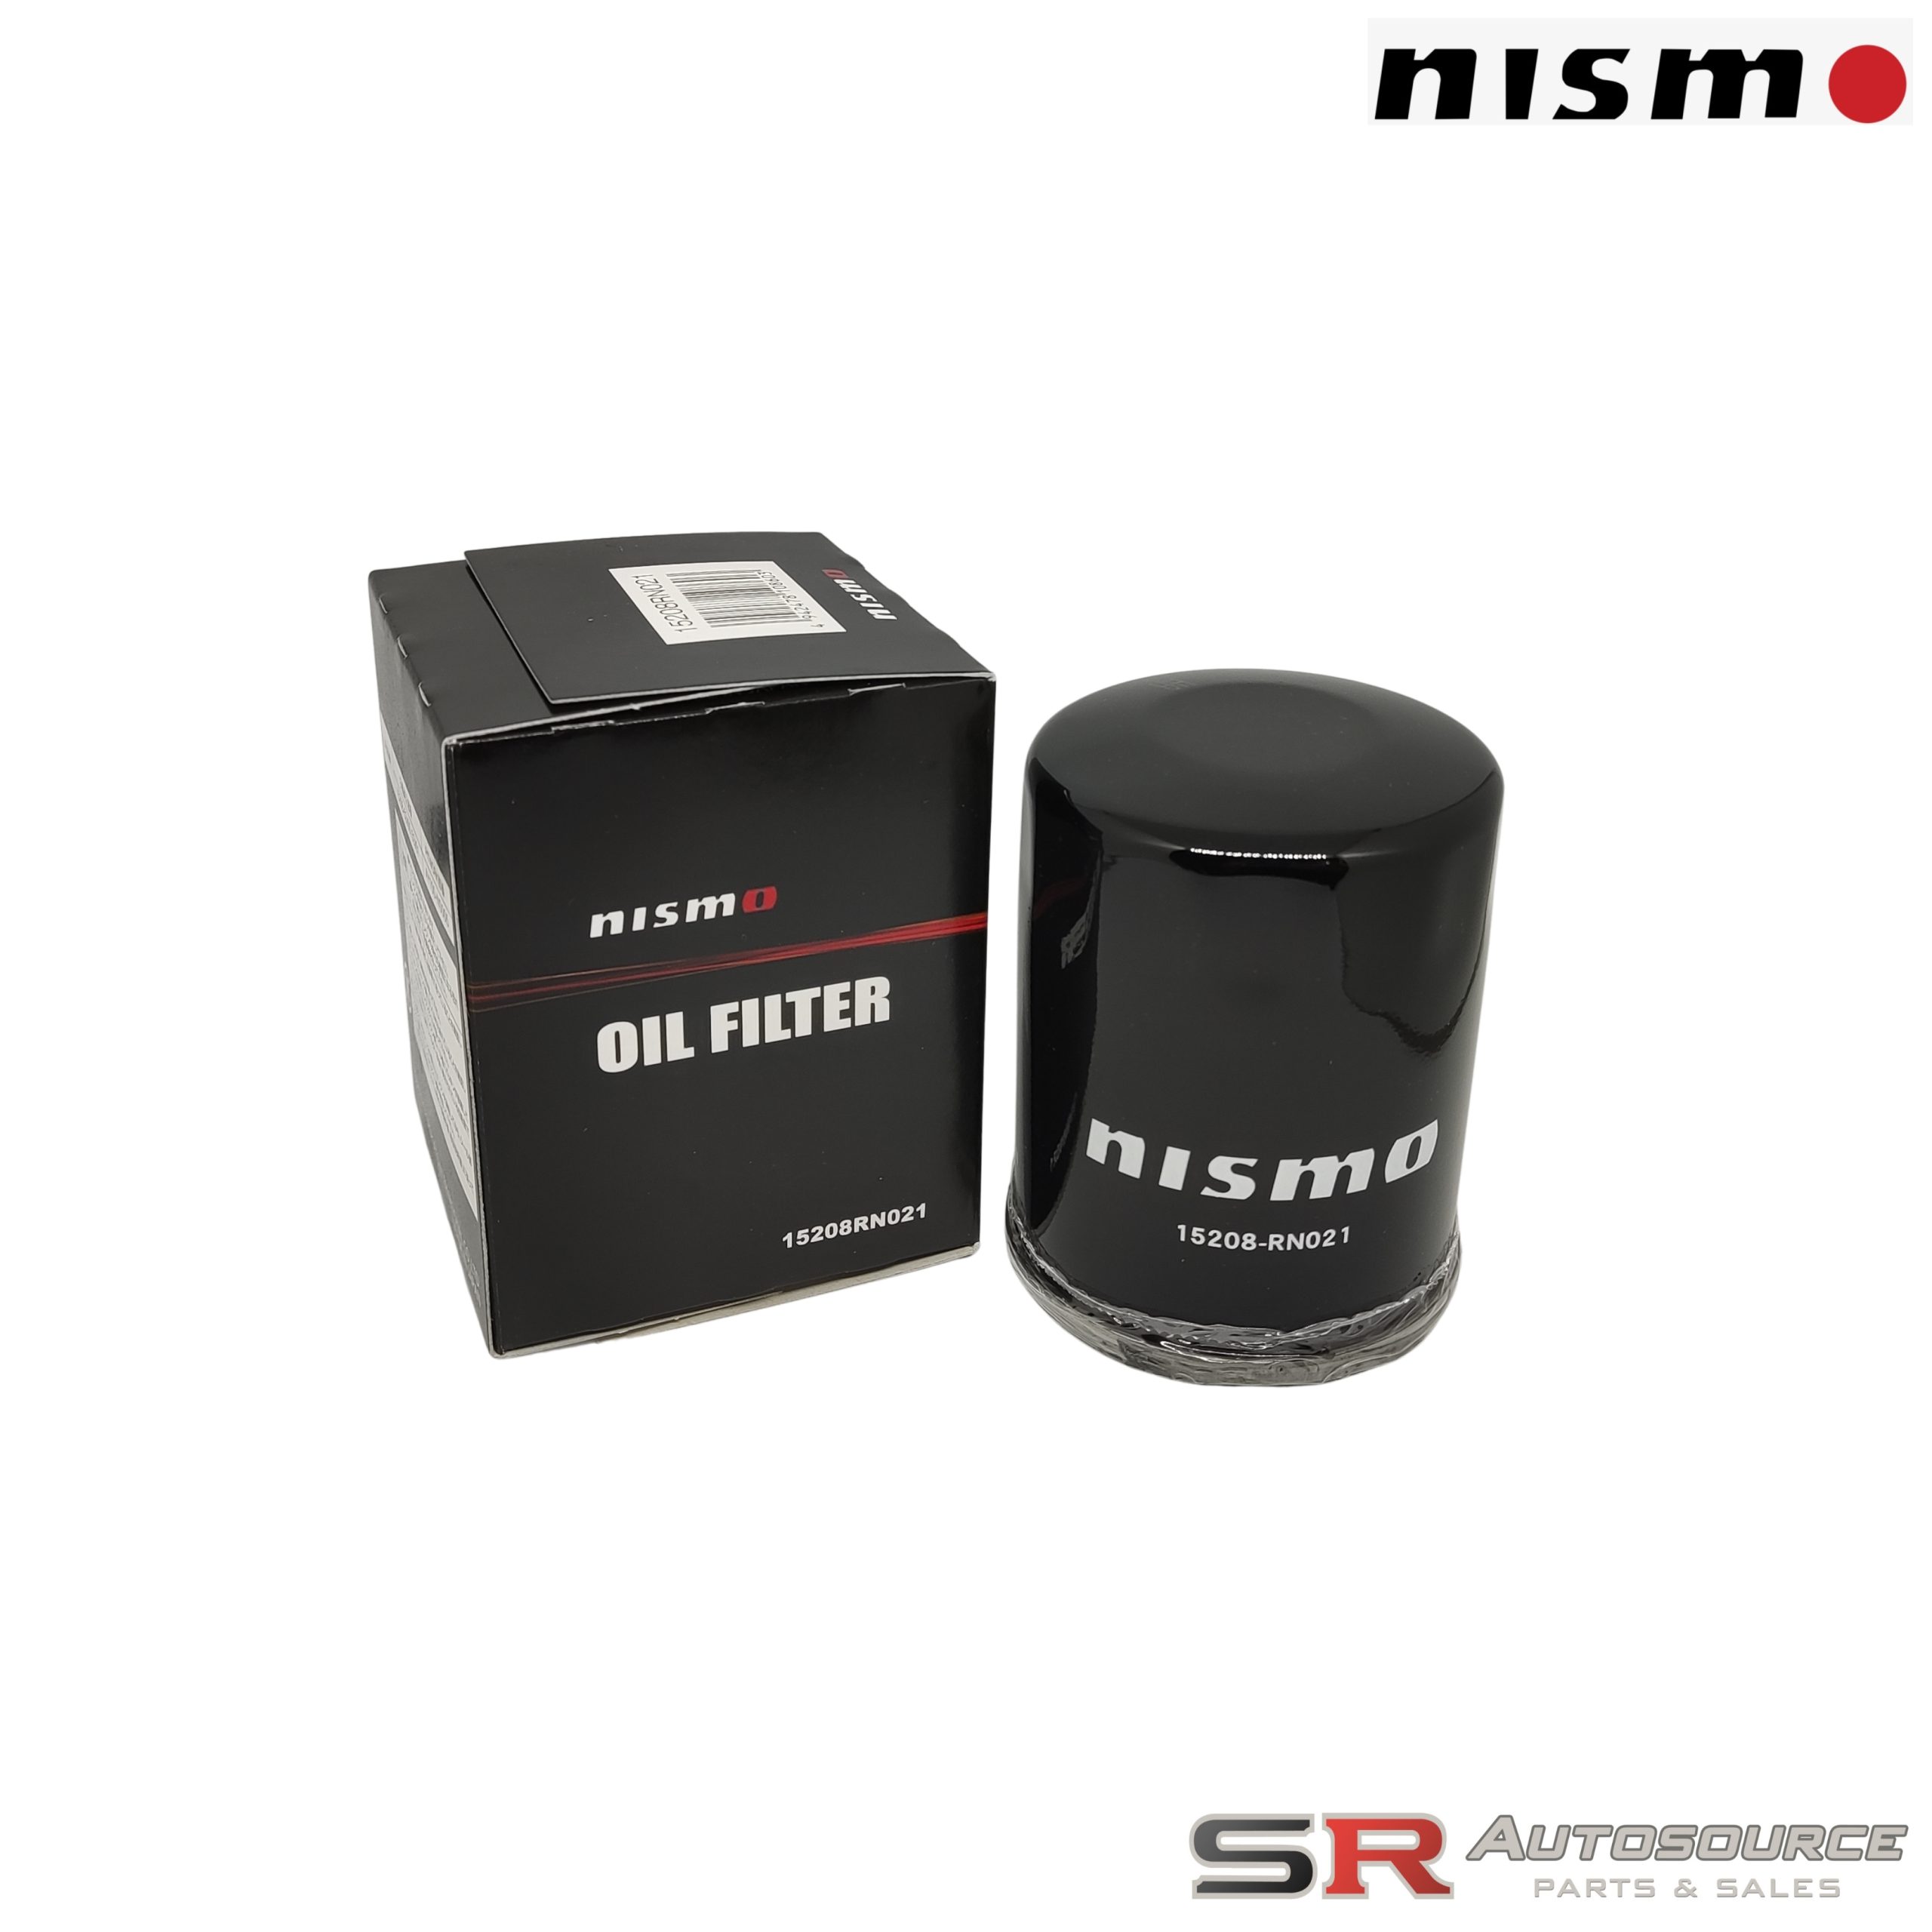 Nismo Oil Filter for Silvia and Skyline Models